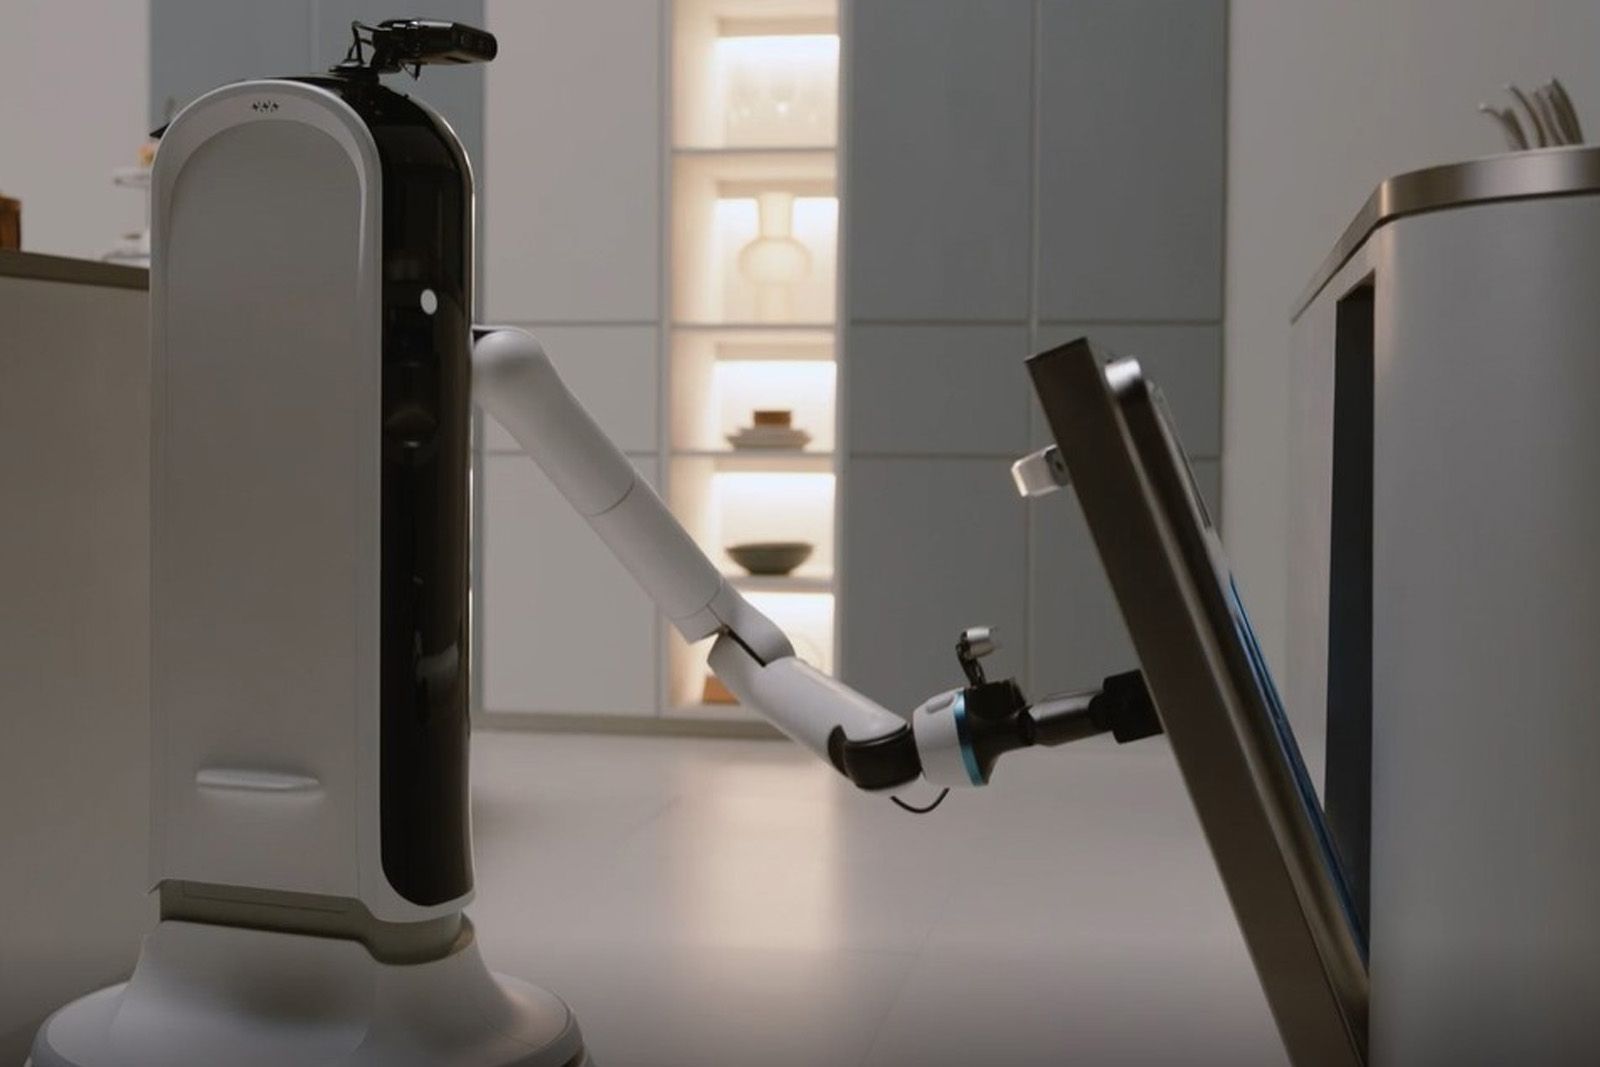 Samsung's new robots can put away your shopping and load your dishwasher photo 1